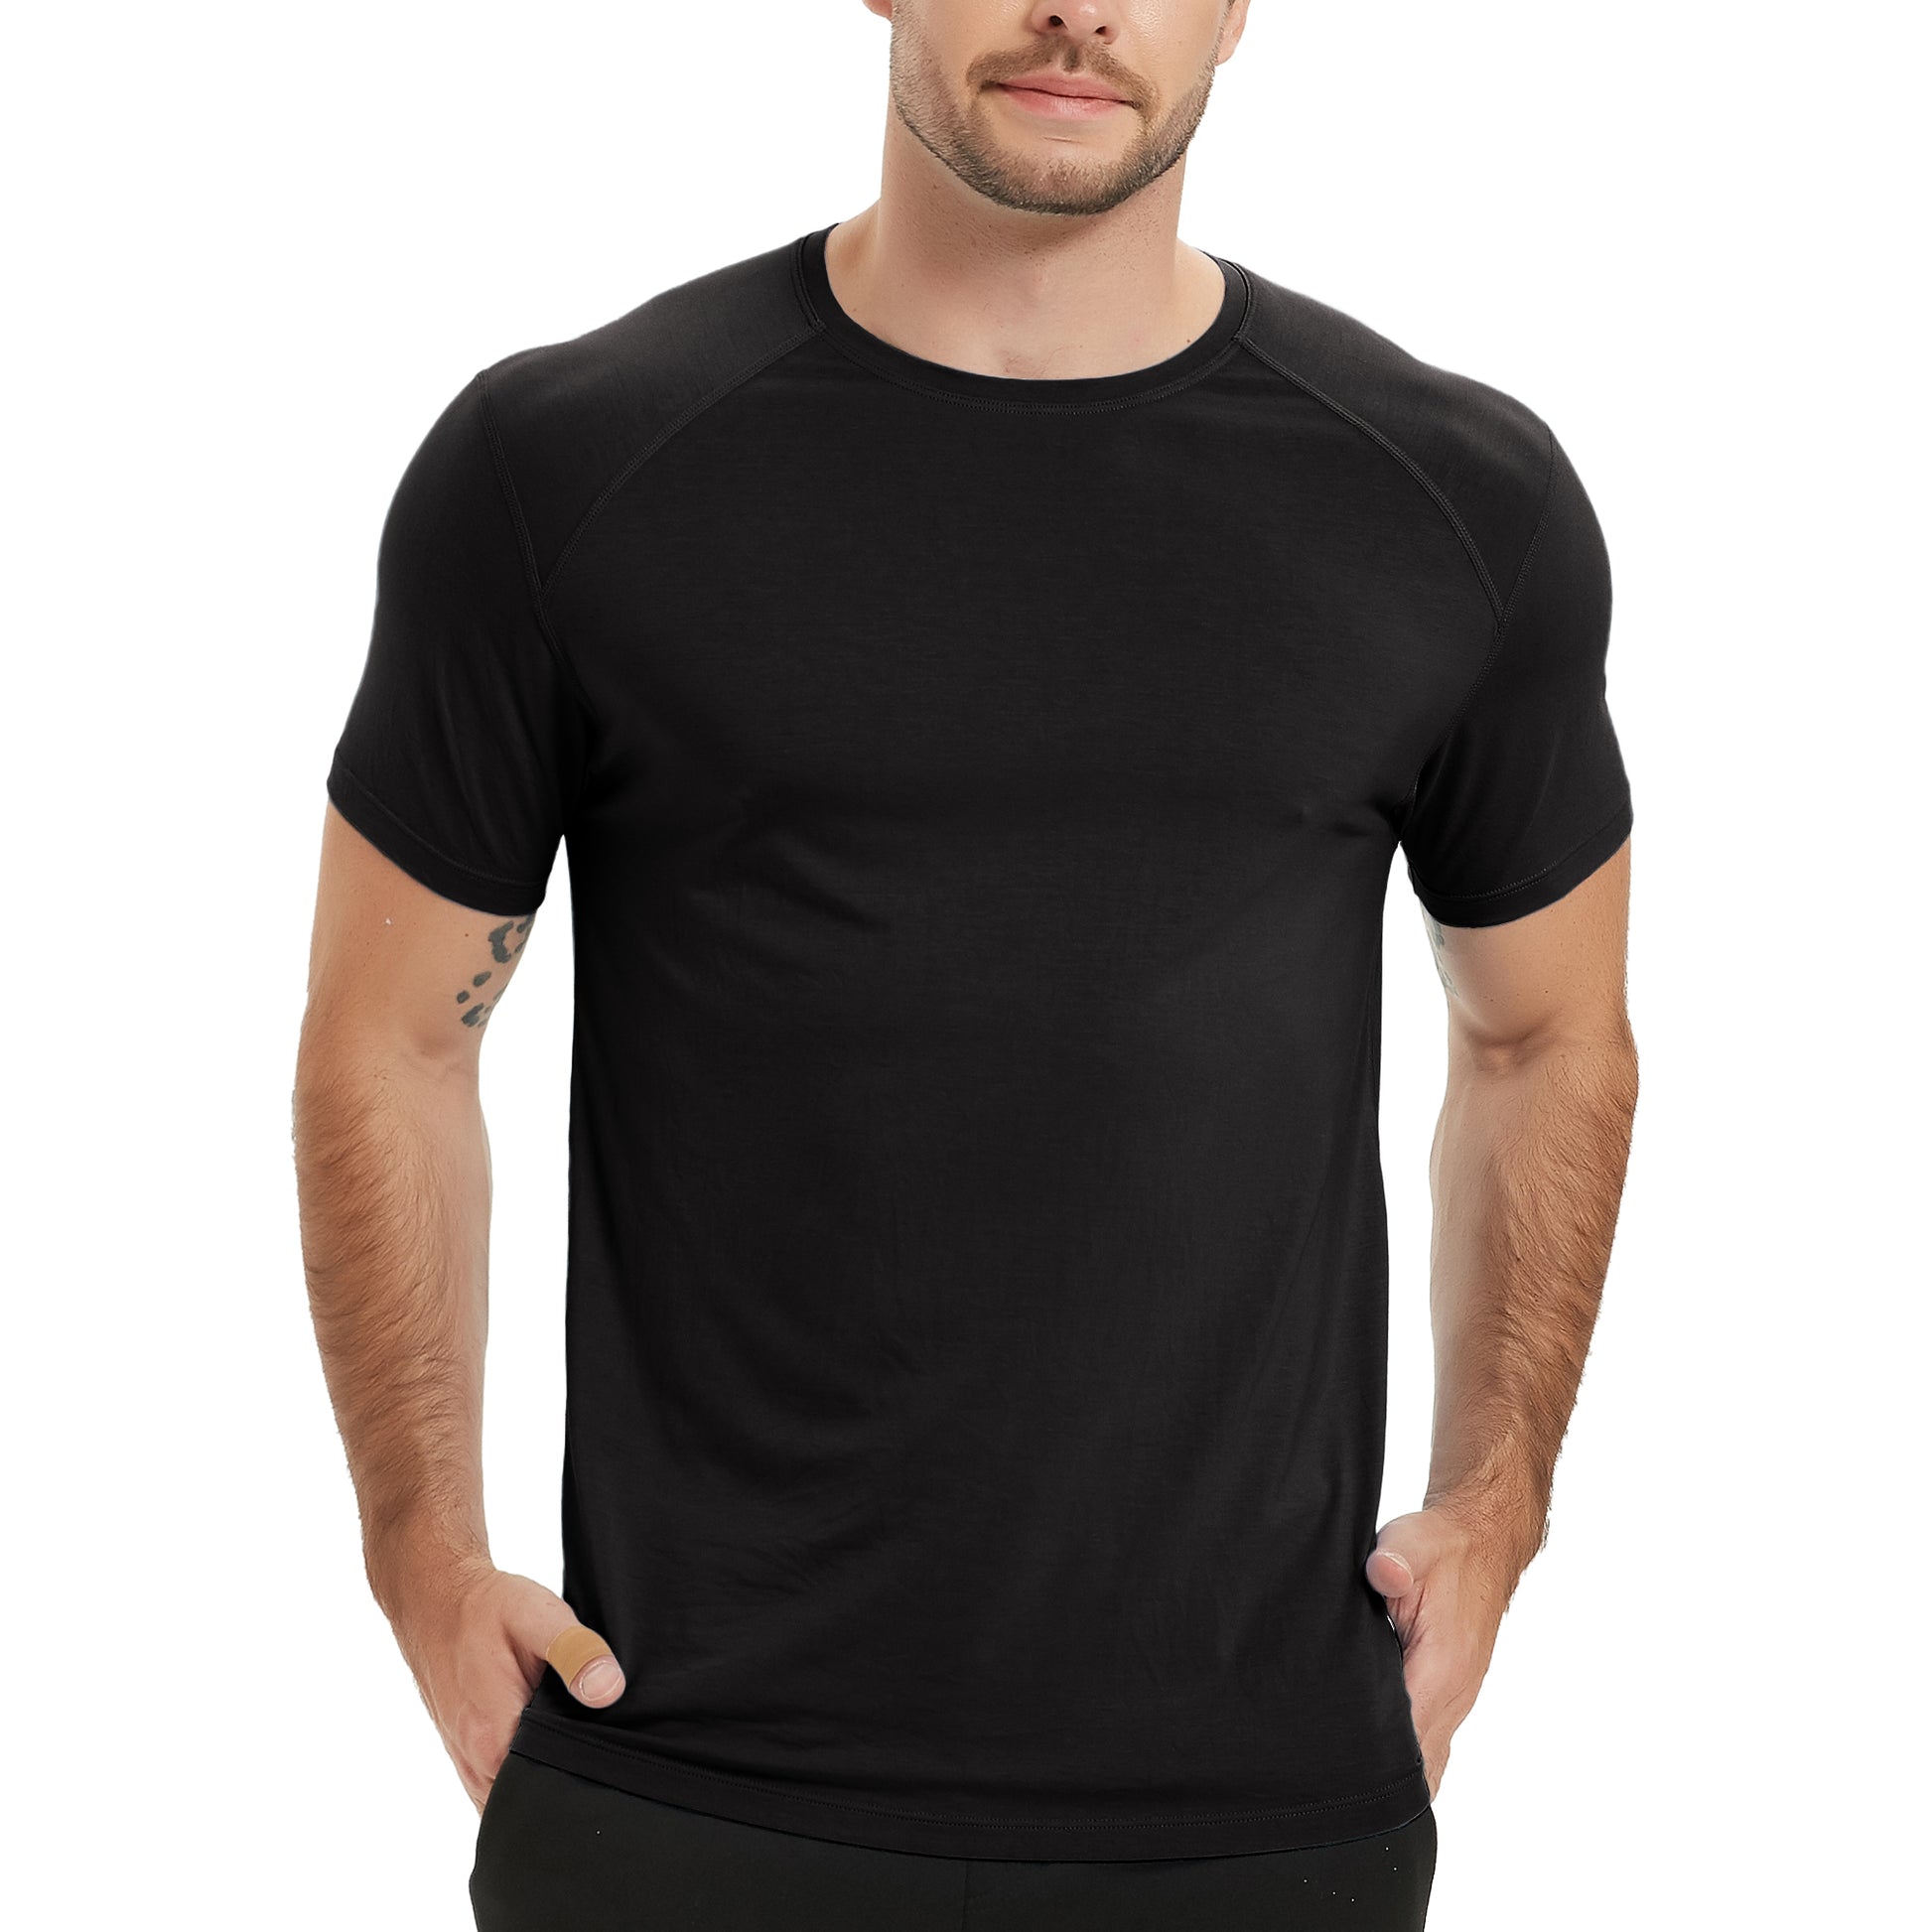  Qopobobo Black T Shirts for Men Men's Cotton Performance Short  Sleeve T-Shirt Gym Workout Short Sleeve Tee Slim Fit Blouse : Clothing,  Shoes & Jewelry